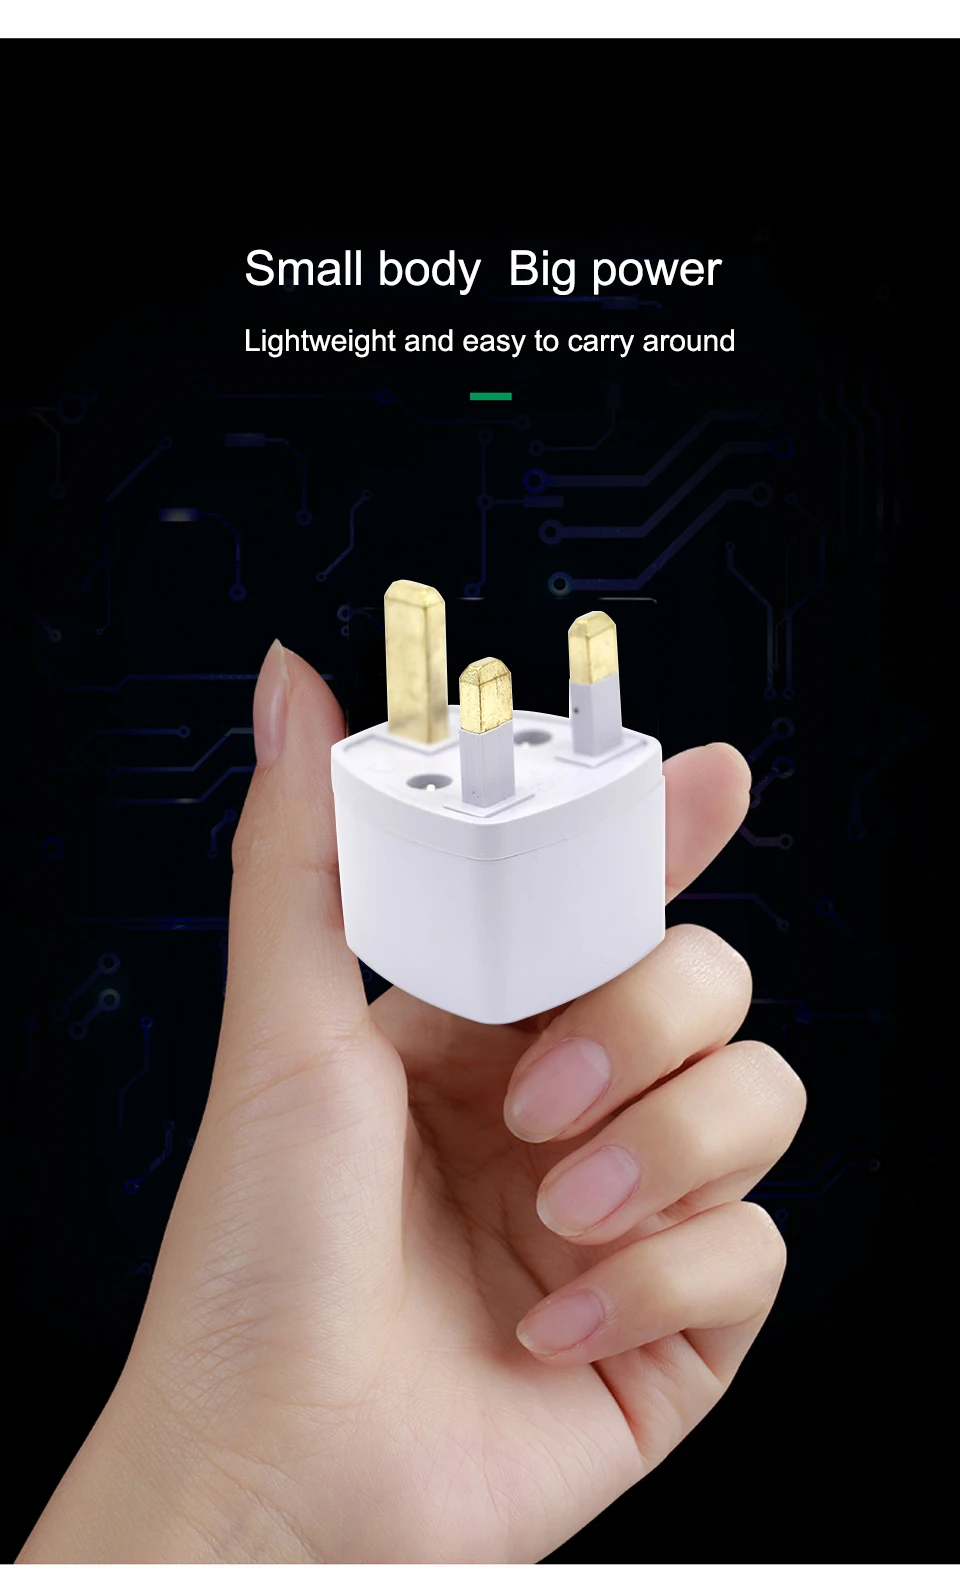 New Arrival 1 PC Universal UK US AU to EU AC Power Socket Plug Travel Electrical Charger Adapter Converter Japan China American (4)